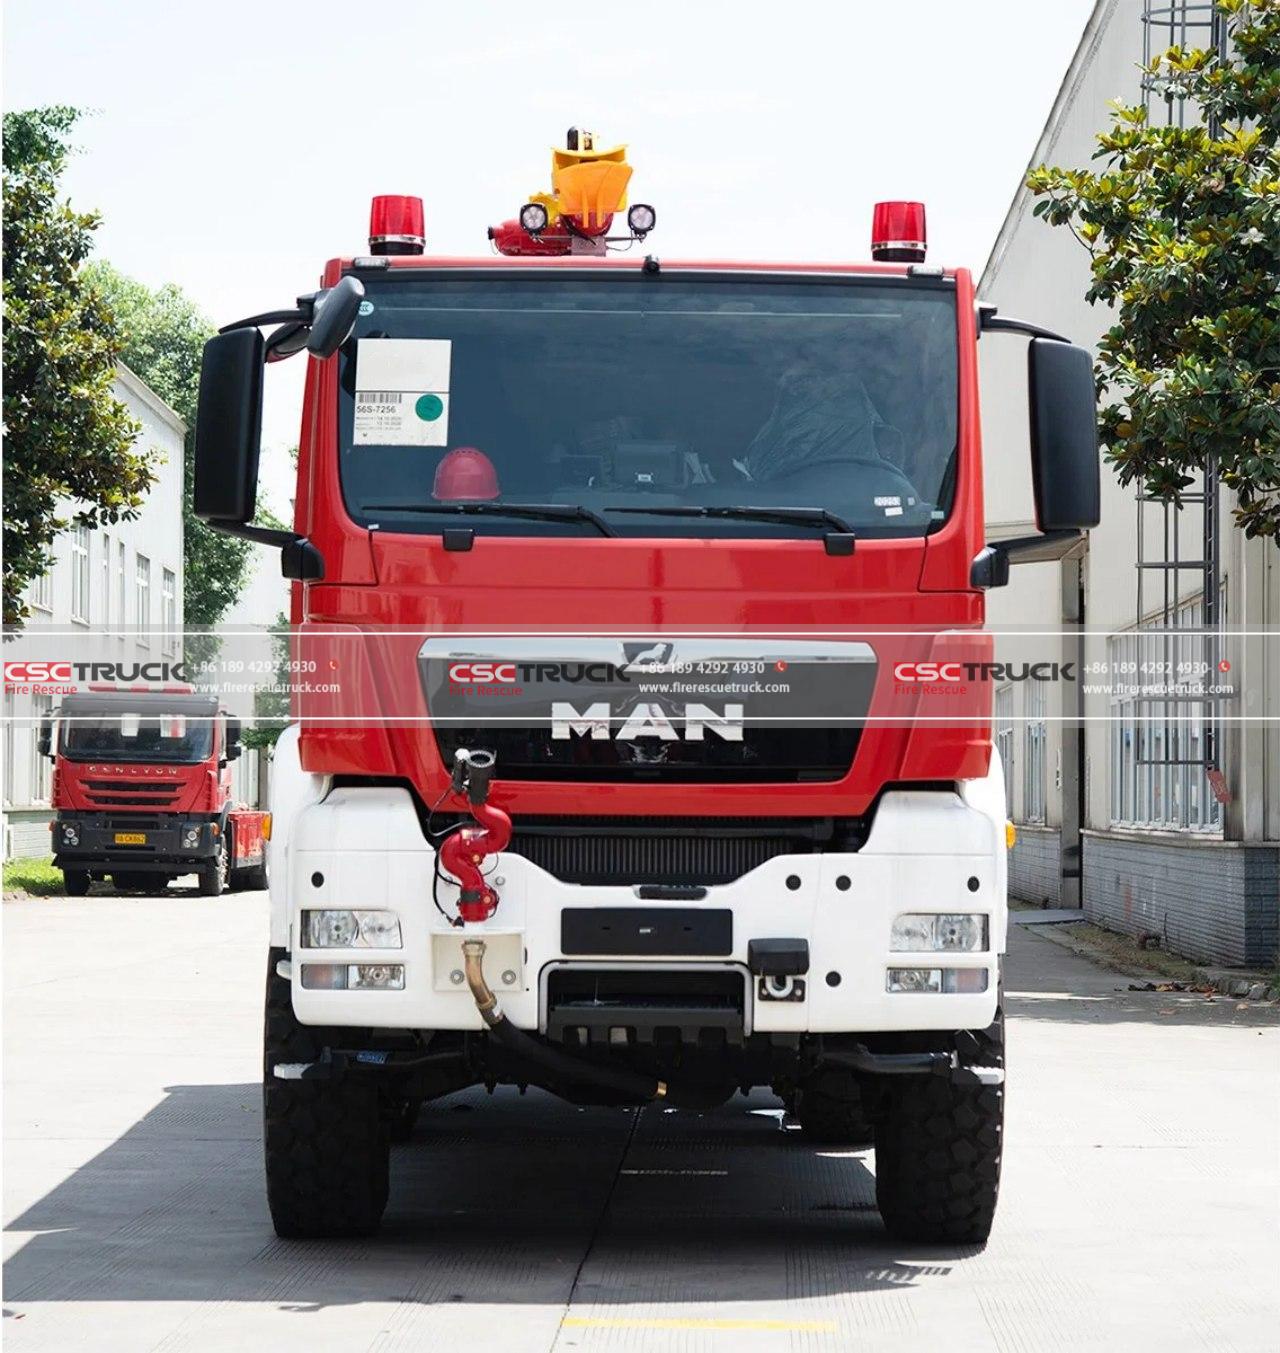 Airport Rescue Fire Fighting Truck (3)